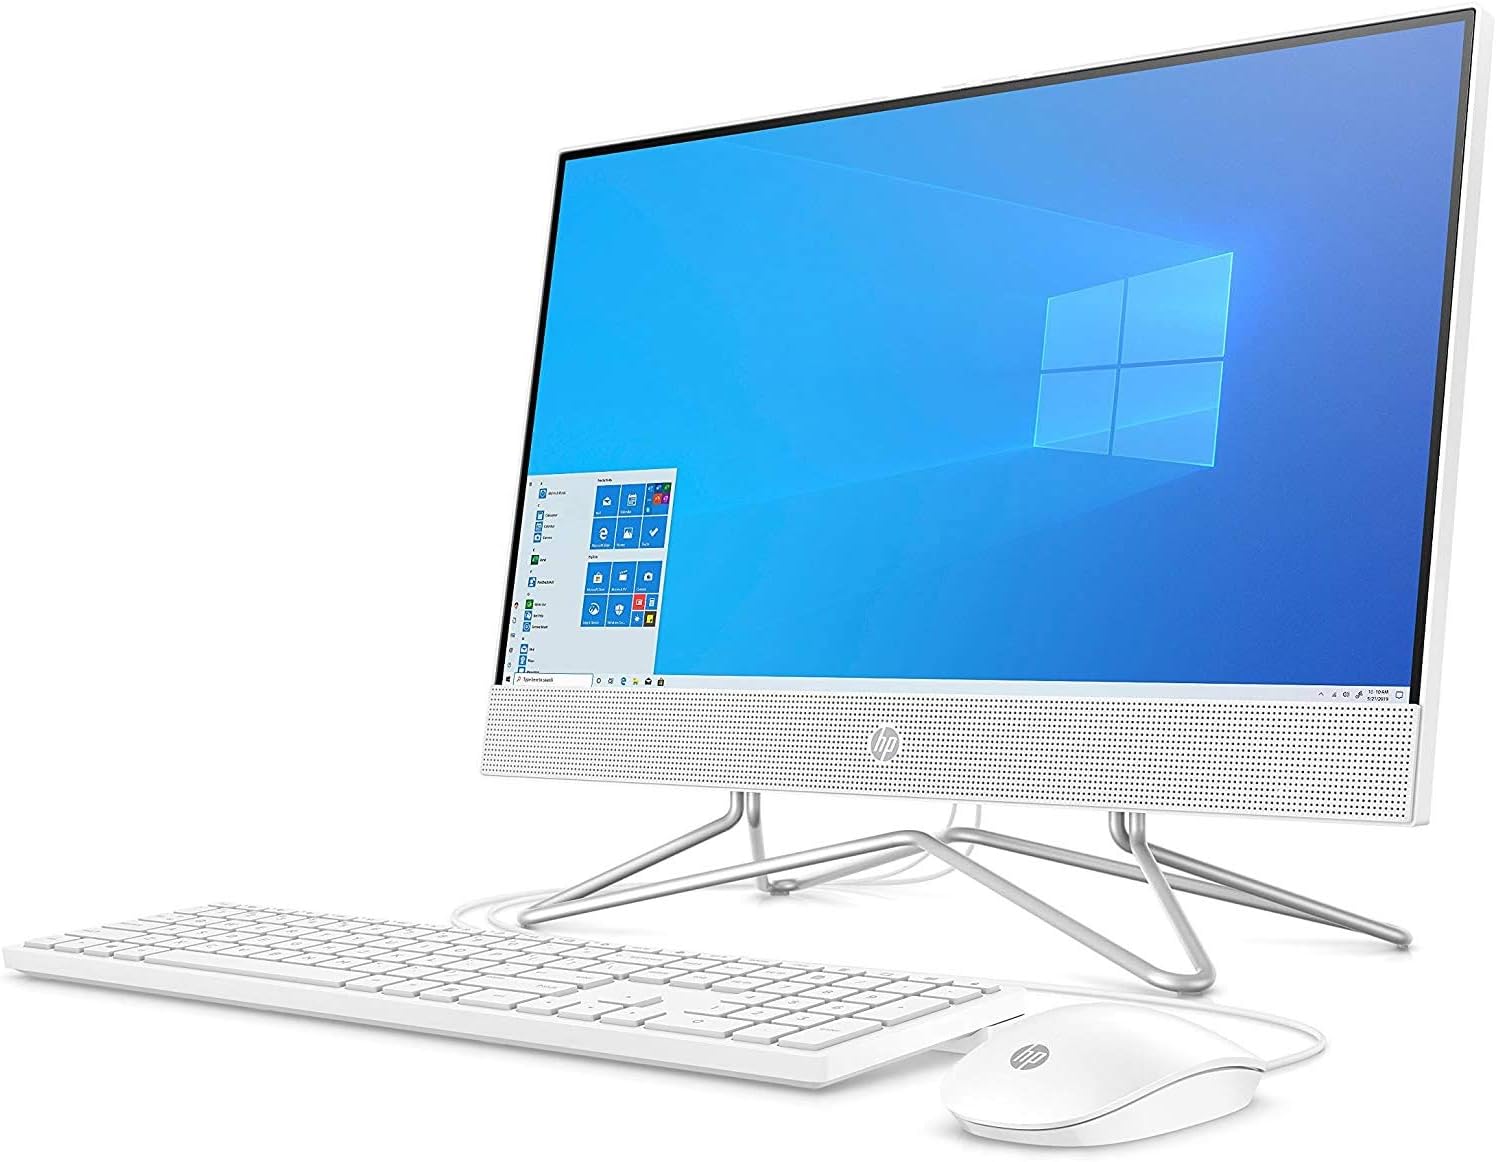 What Is An All-In-One Desktop Computer?